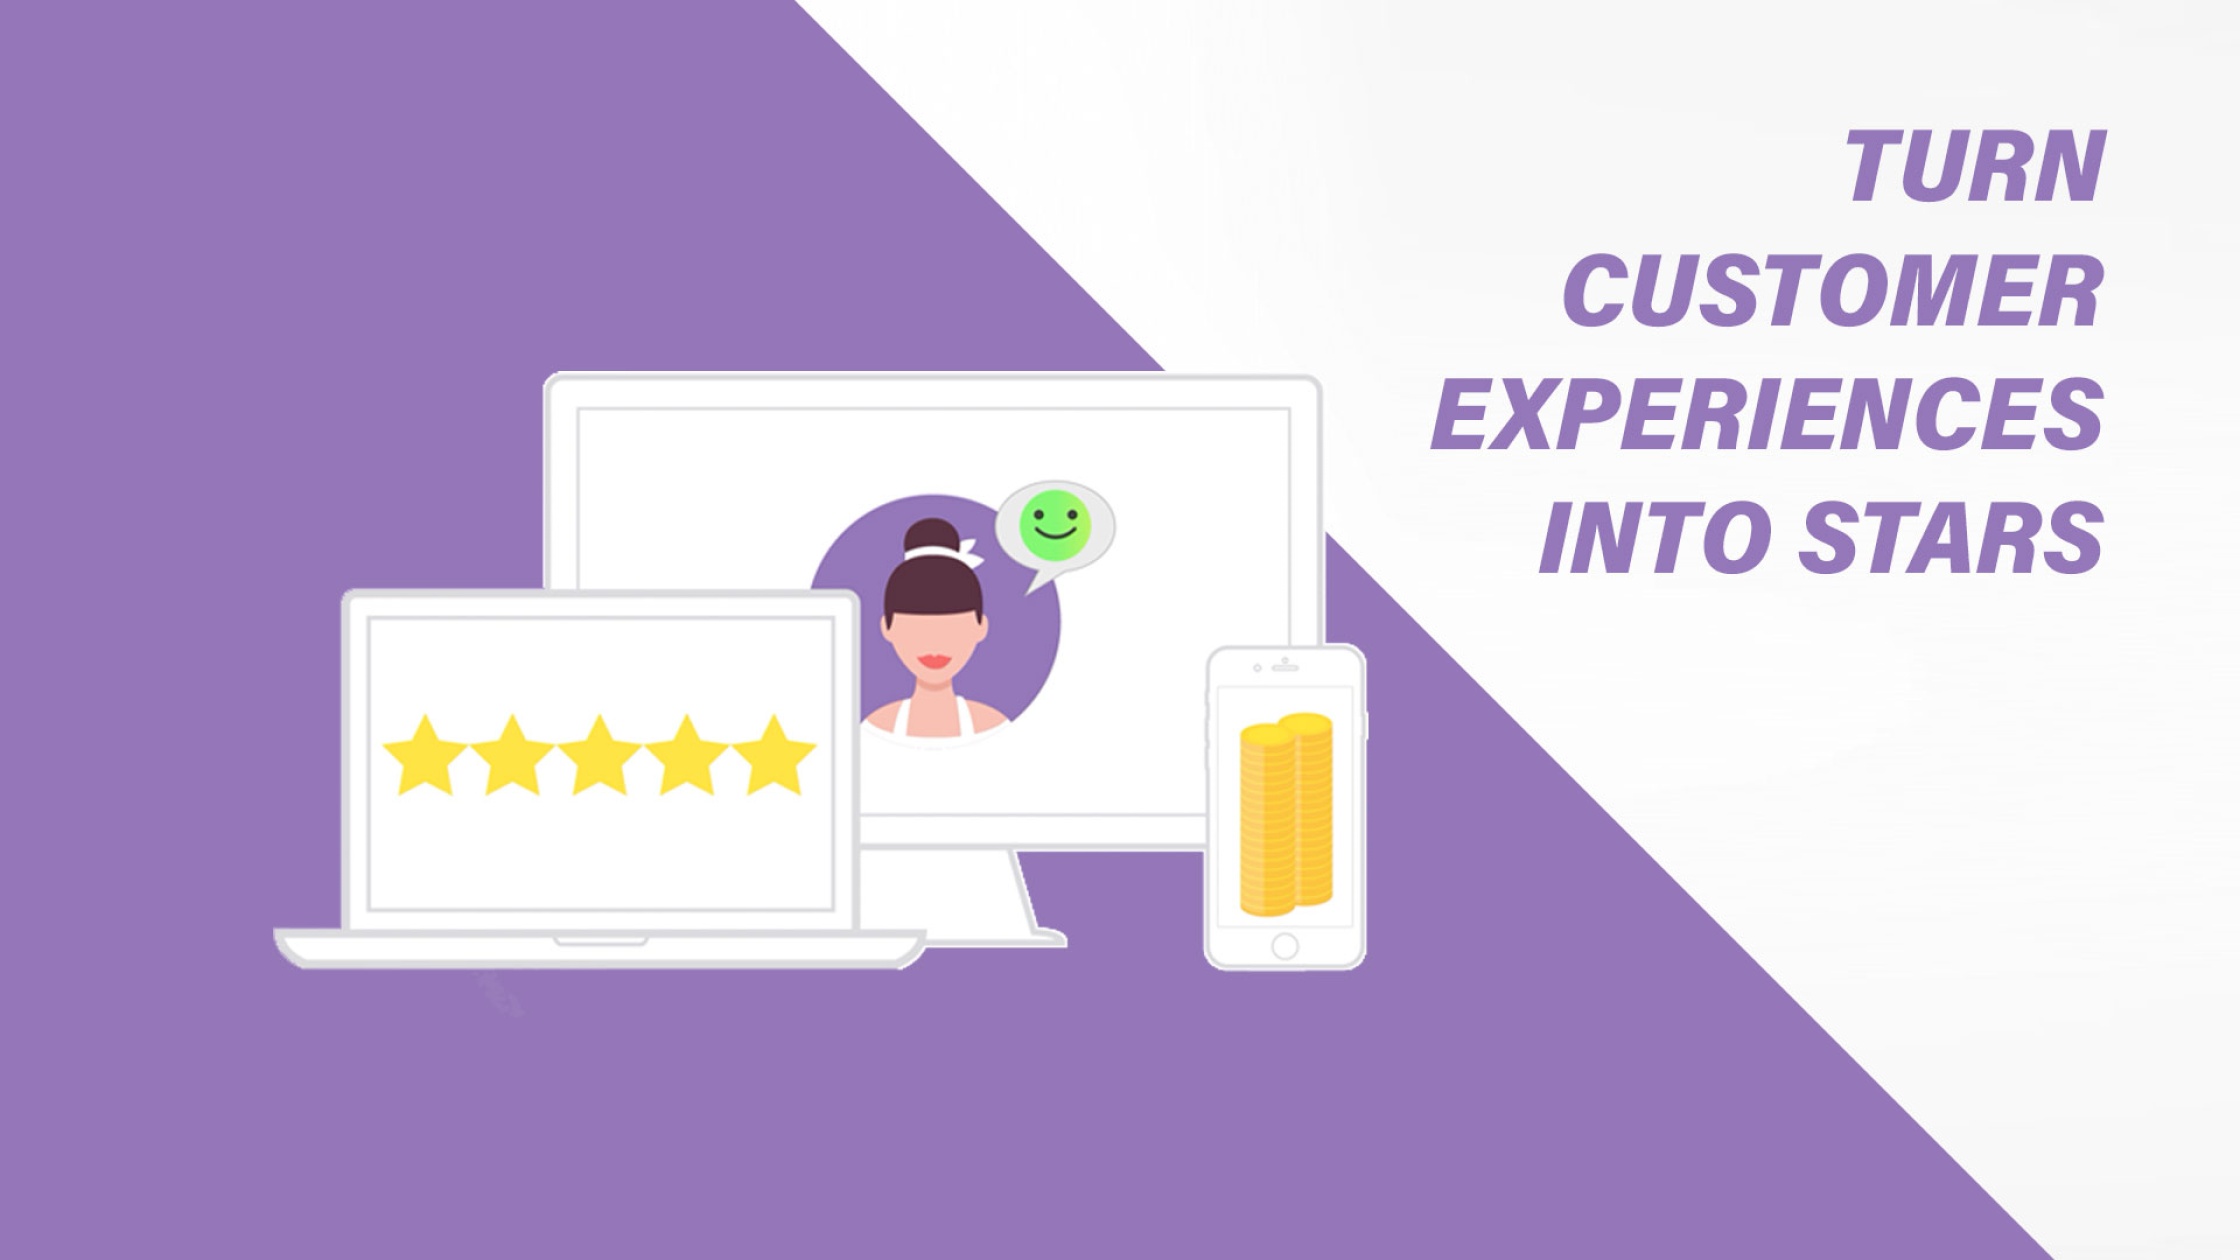 Harness the power of reviews to drive business growth